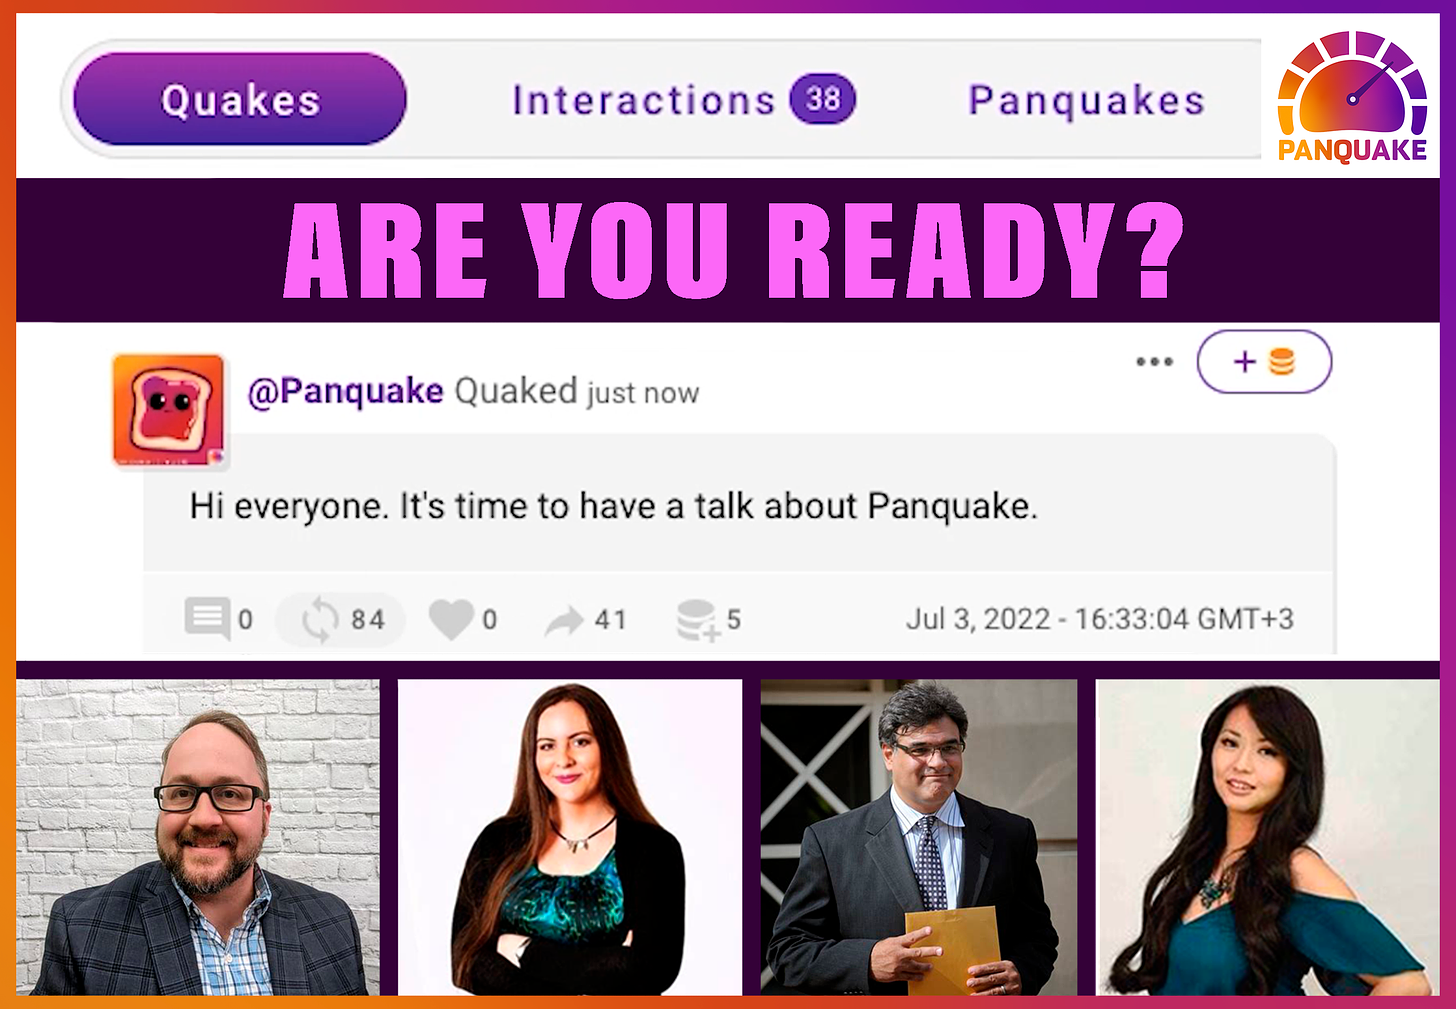 Quakes Interactions Panquakes Panquake ARE YOU READY?  @Panquake Quaked just now Hi everyone. It's time to have a talk about Panquake.